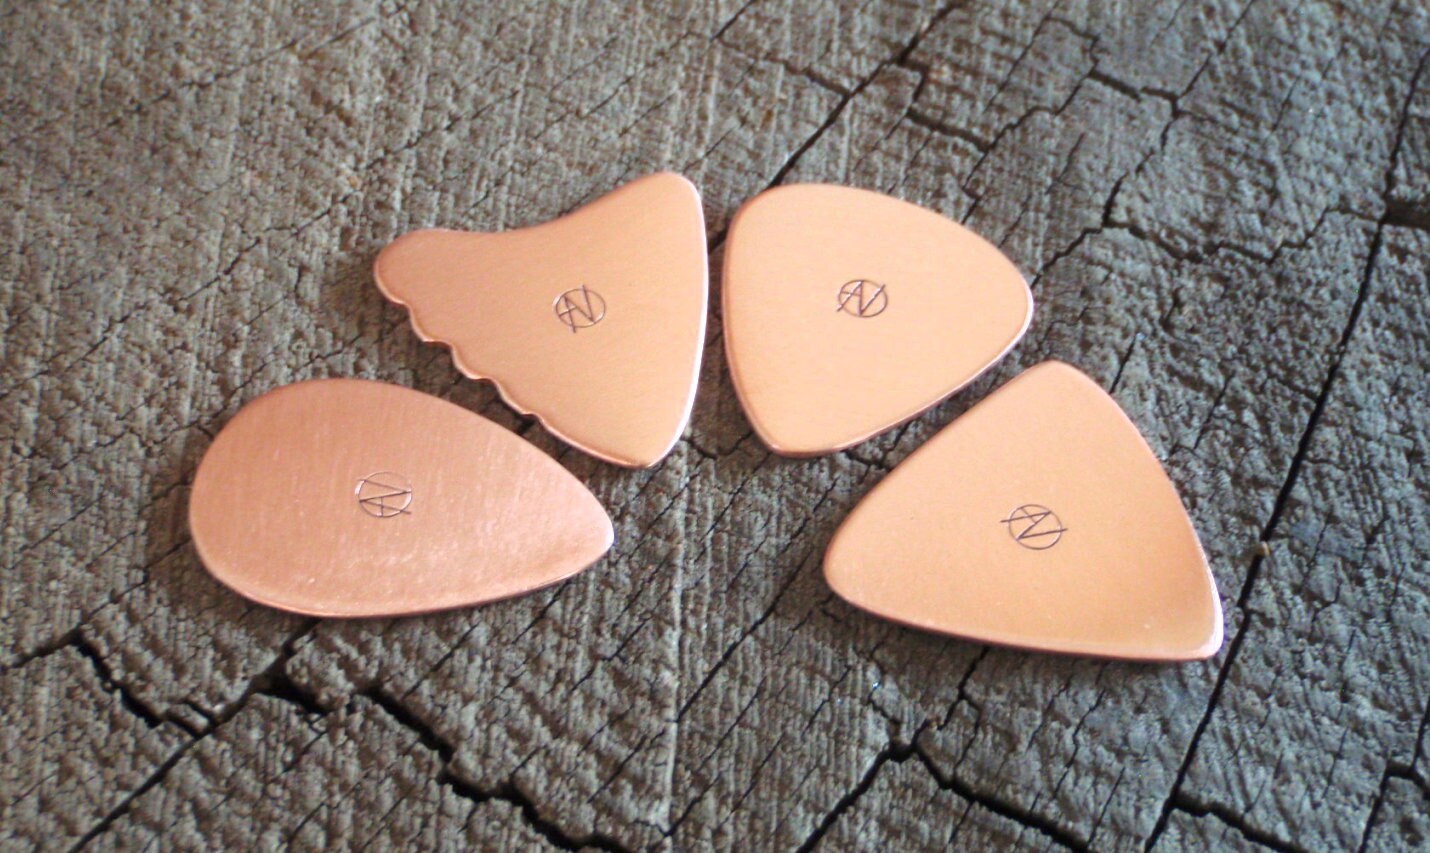 Grab bag of 4 playable copper guitar picks in various shapes and styles